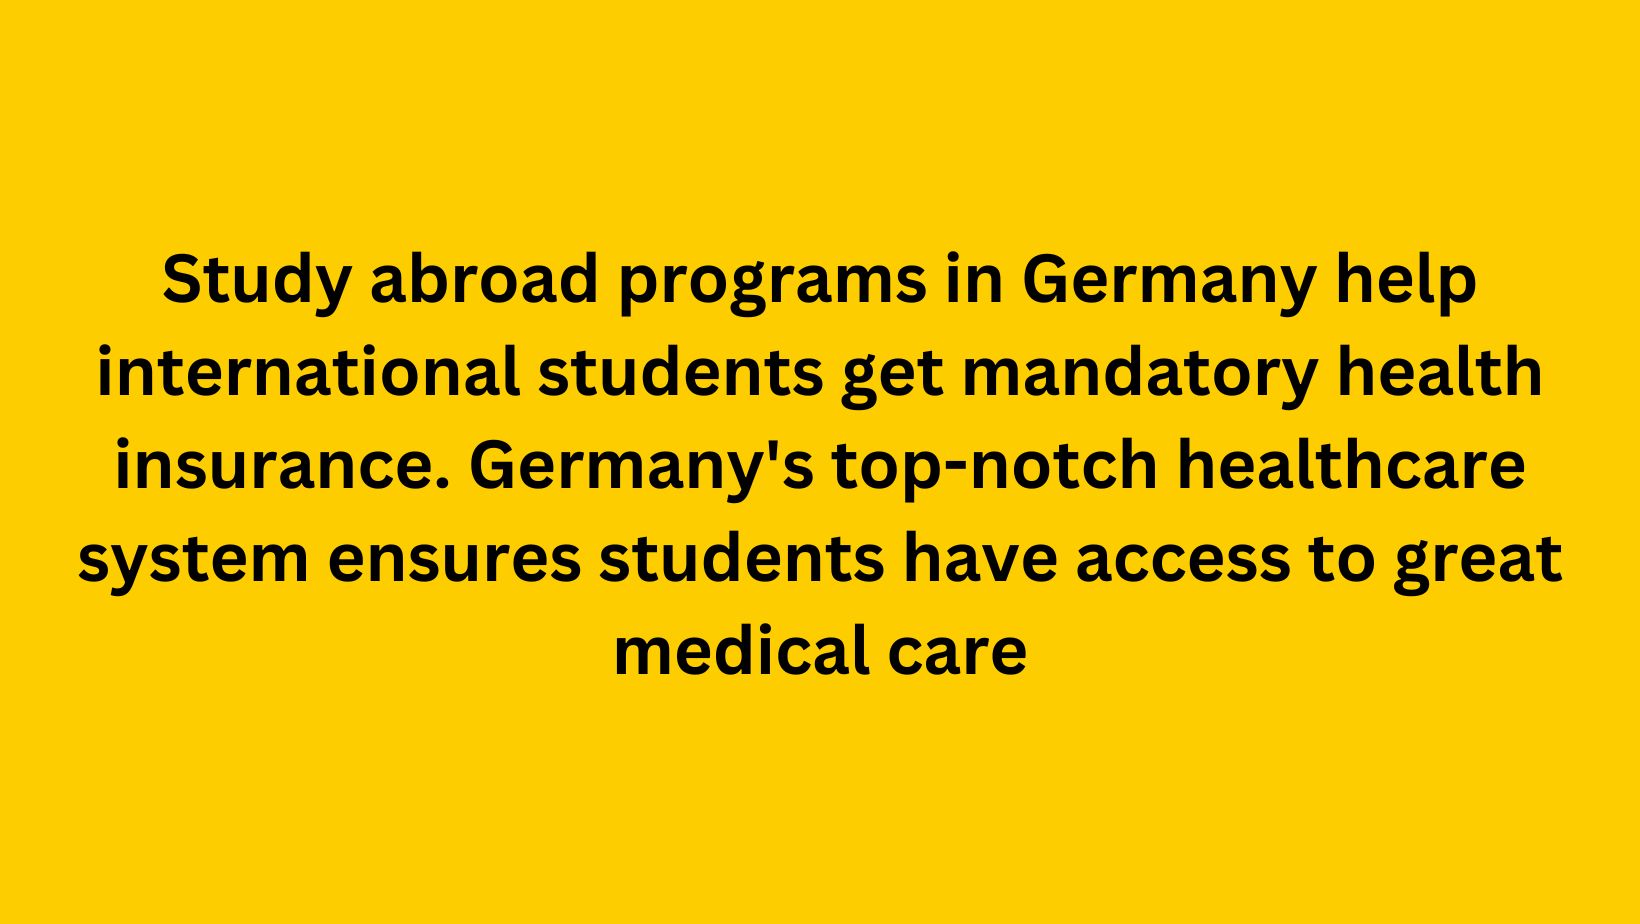 GERMANY STUDY ABROAD - KCR CONSULTANTS - Healthcare